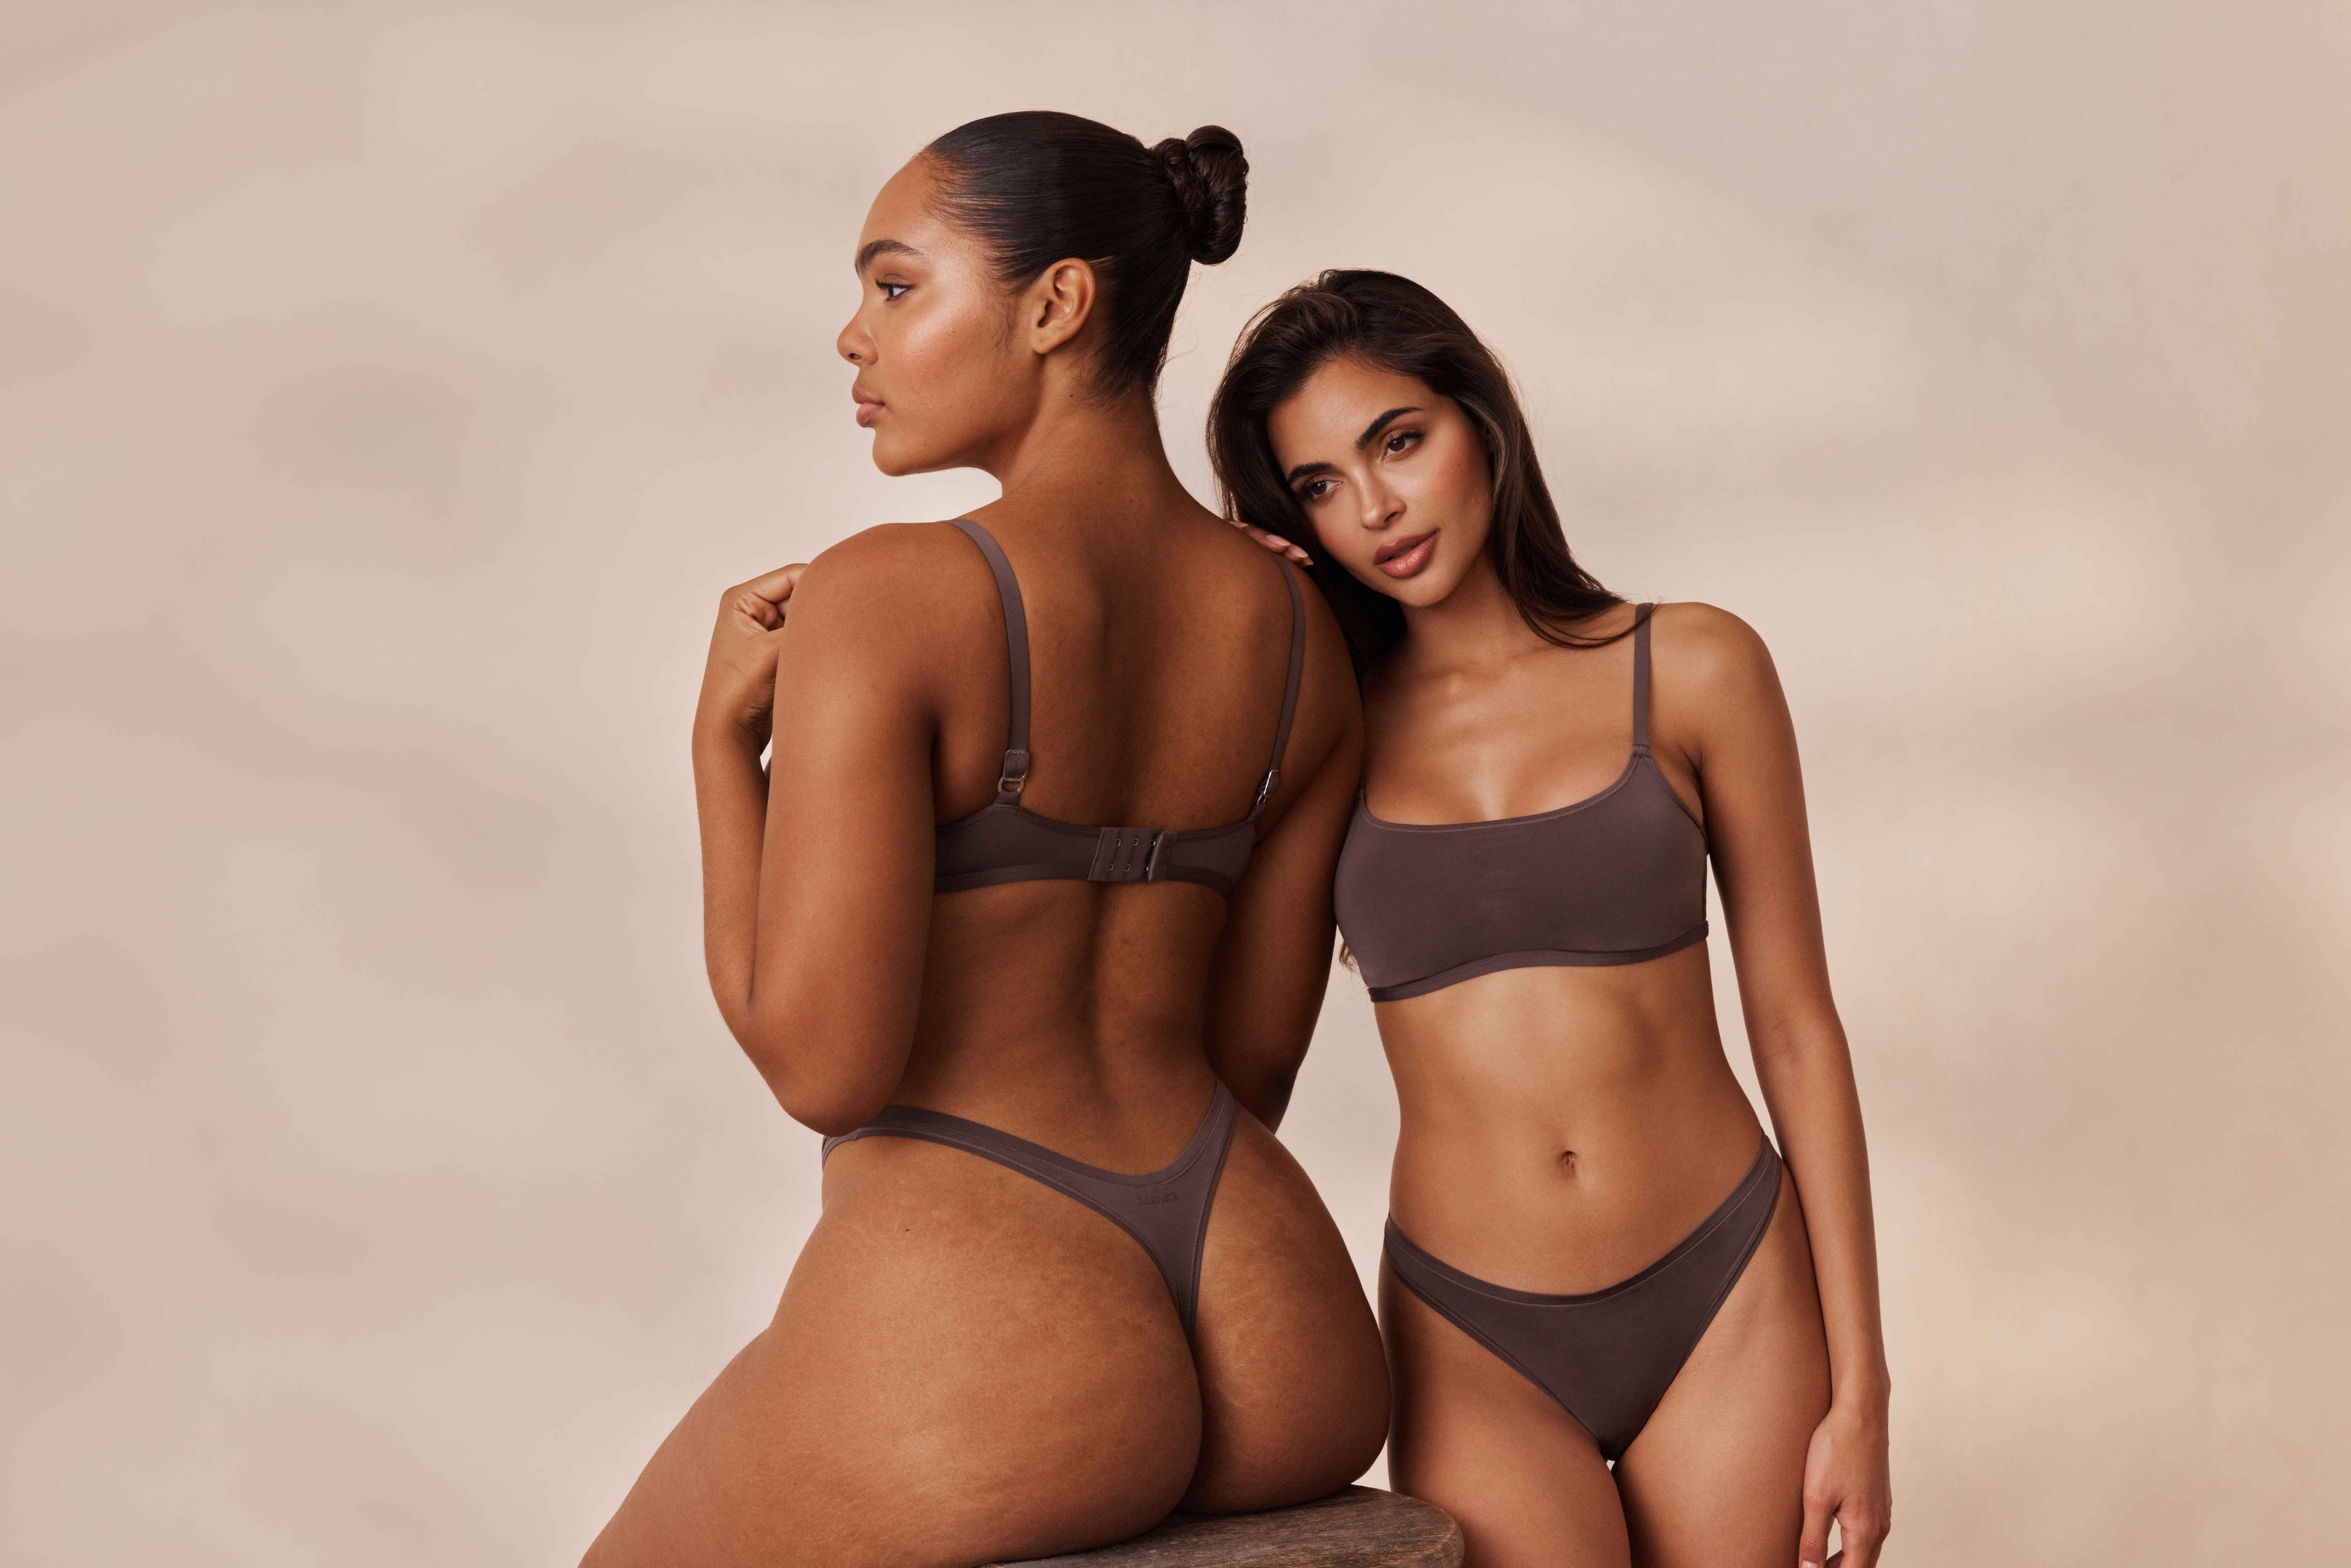 Intimo Lingerie - Ladies looking for a go-to bra that supports